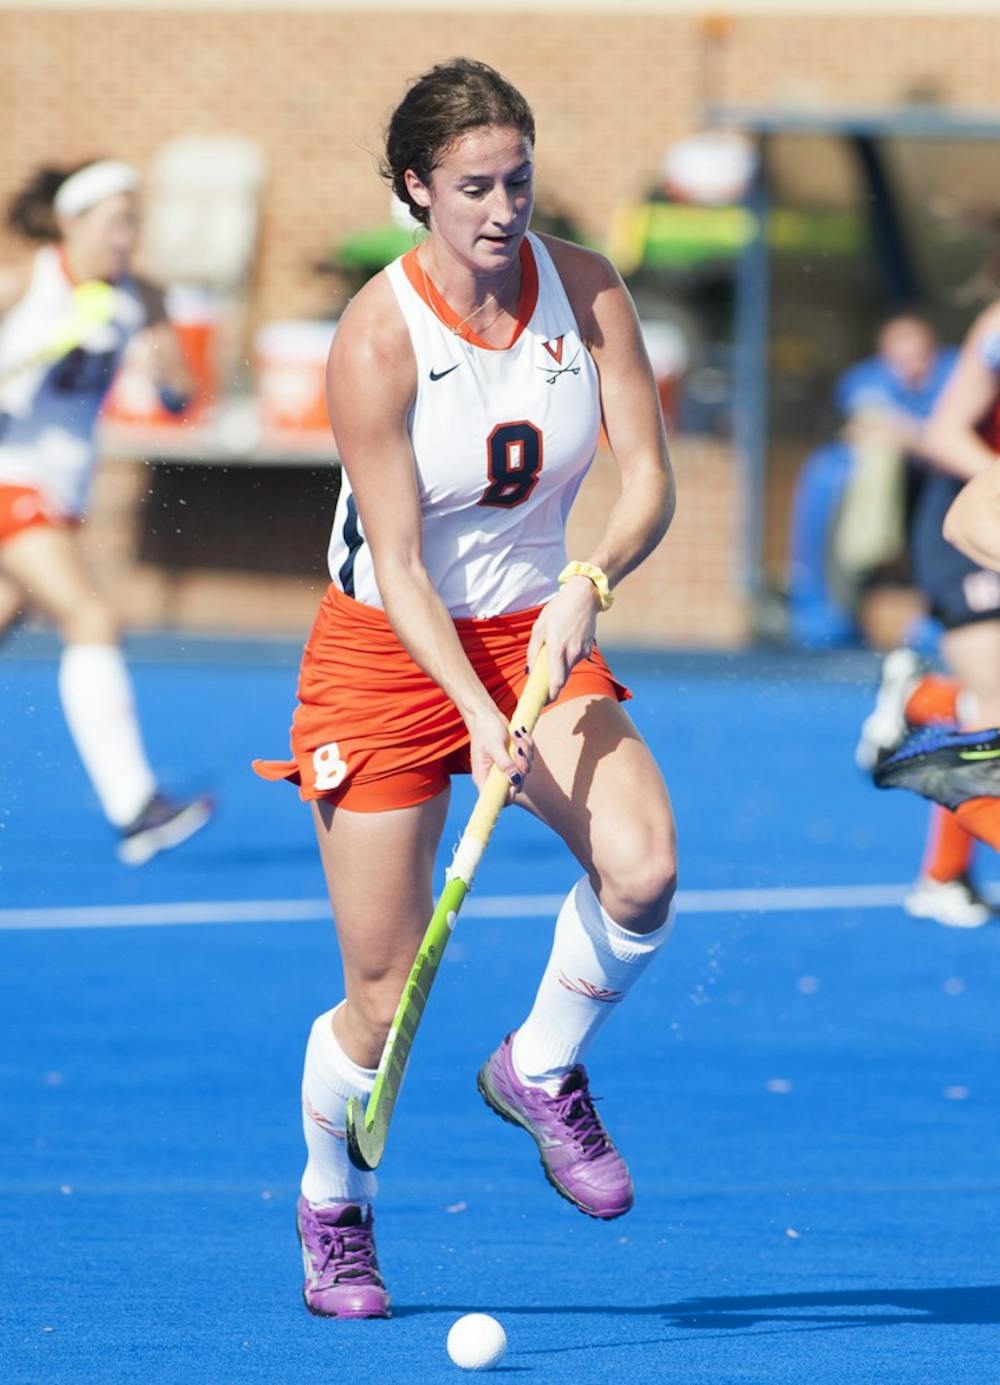 Sophomore midfielder Tara Vittese, Virginia's leading scorer, converted a penalty stroke four minutes into overtime to give the Cavaliers a 3-2 win against Delaware in October.